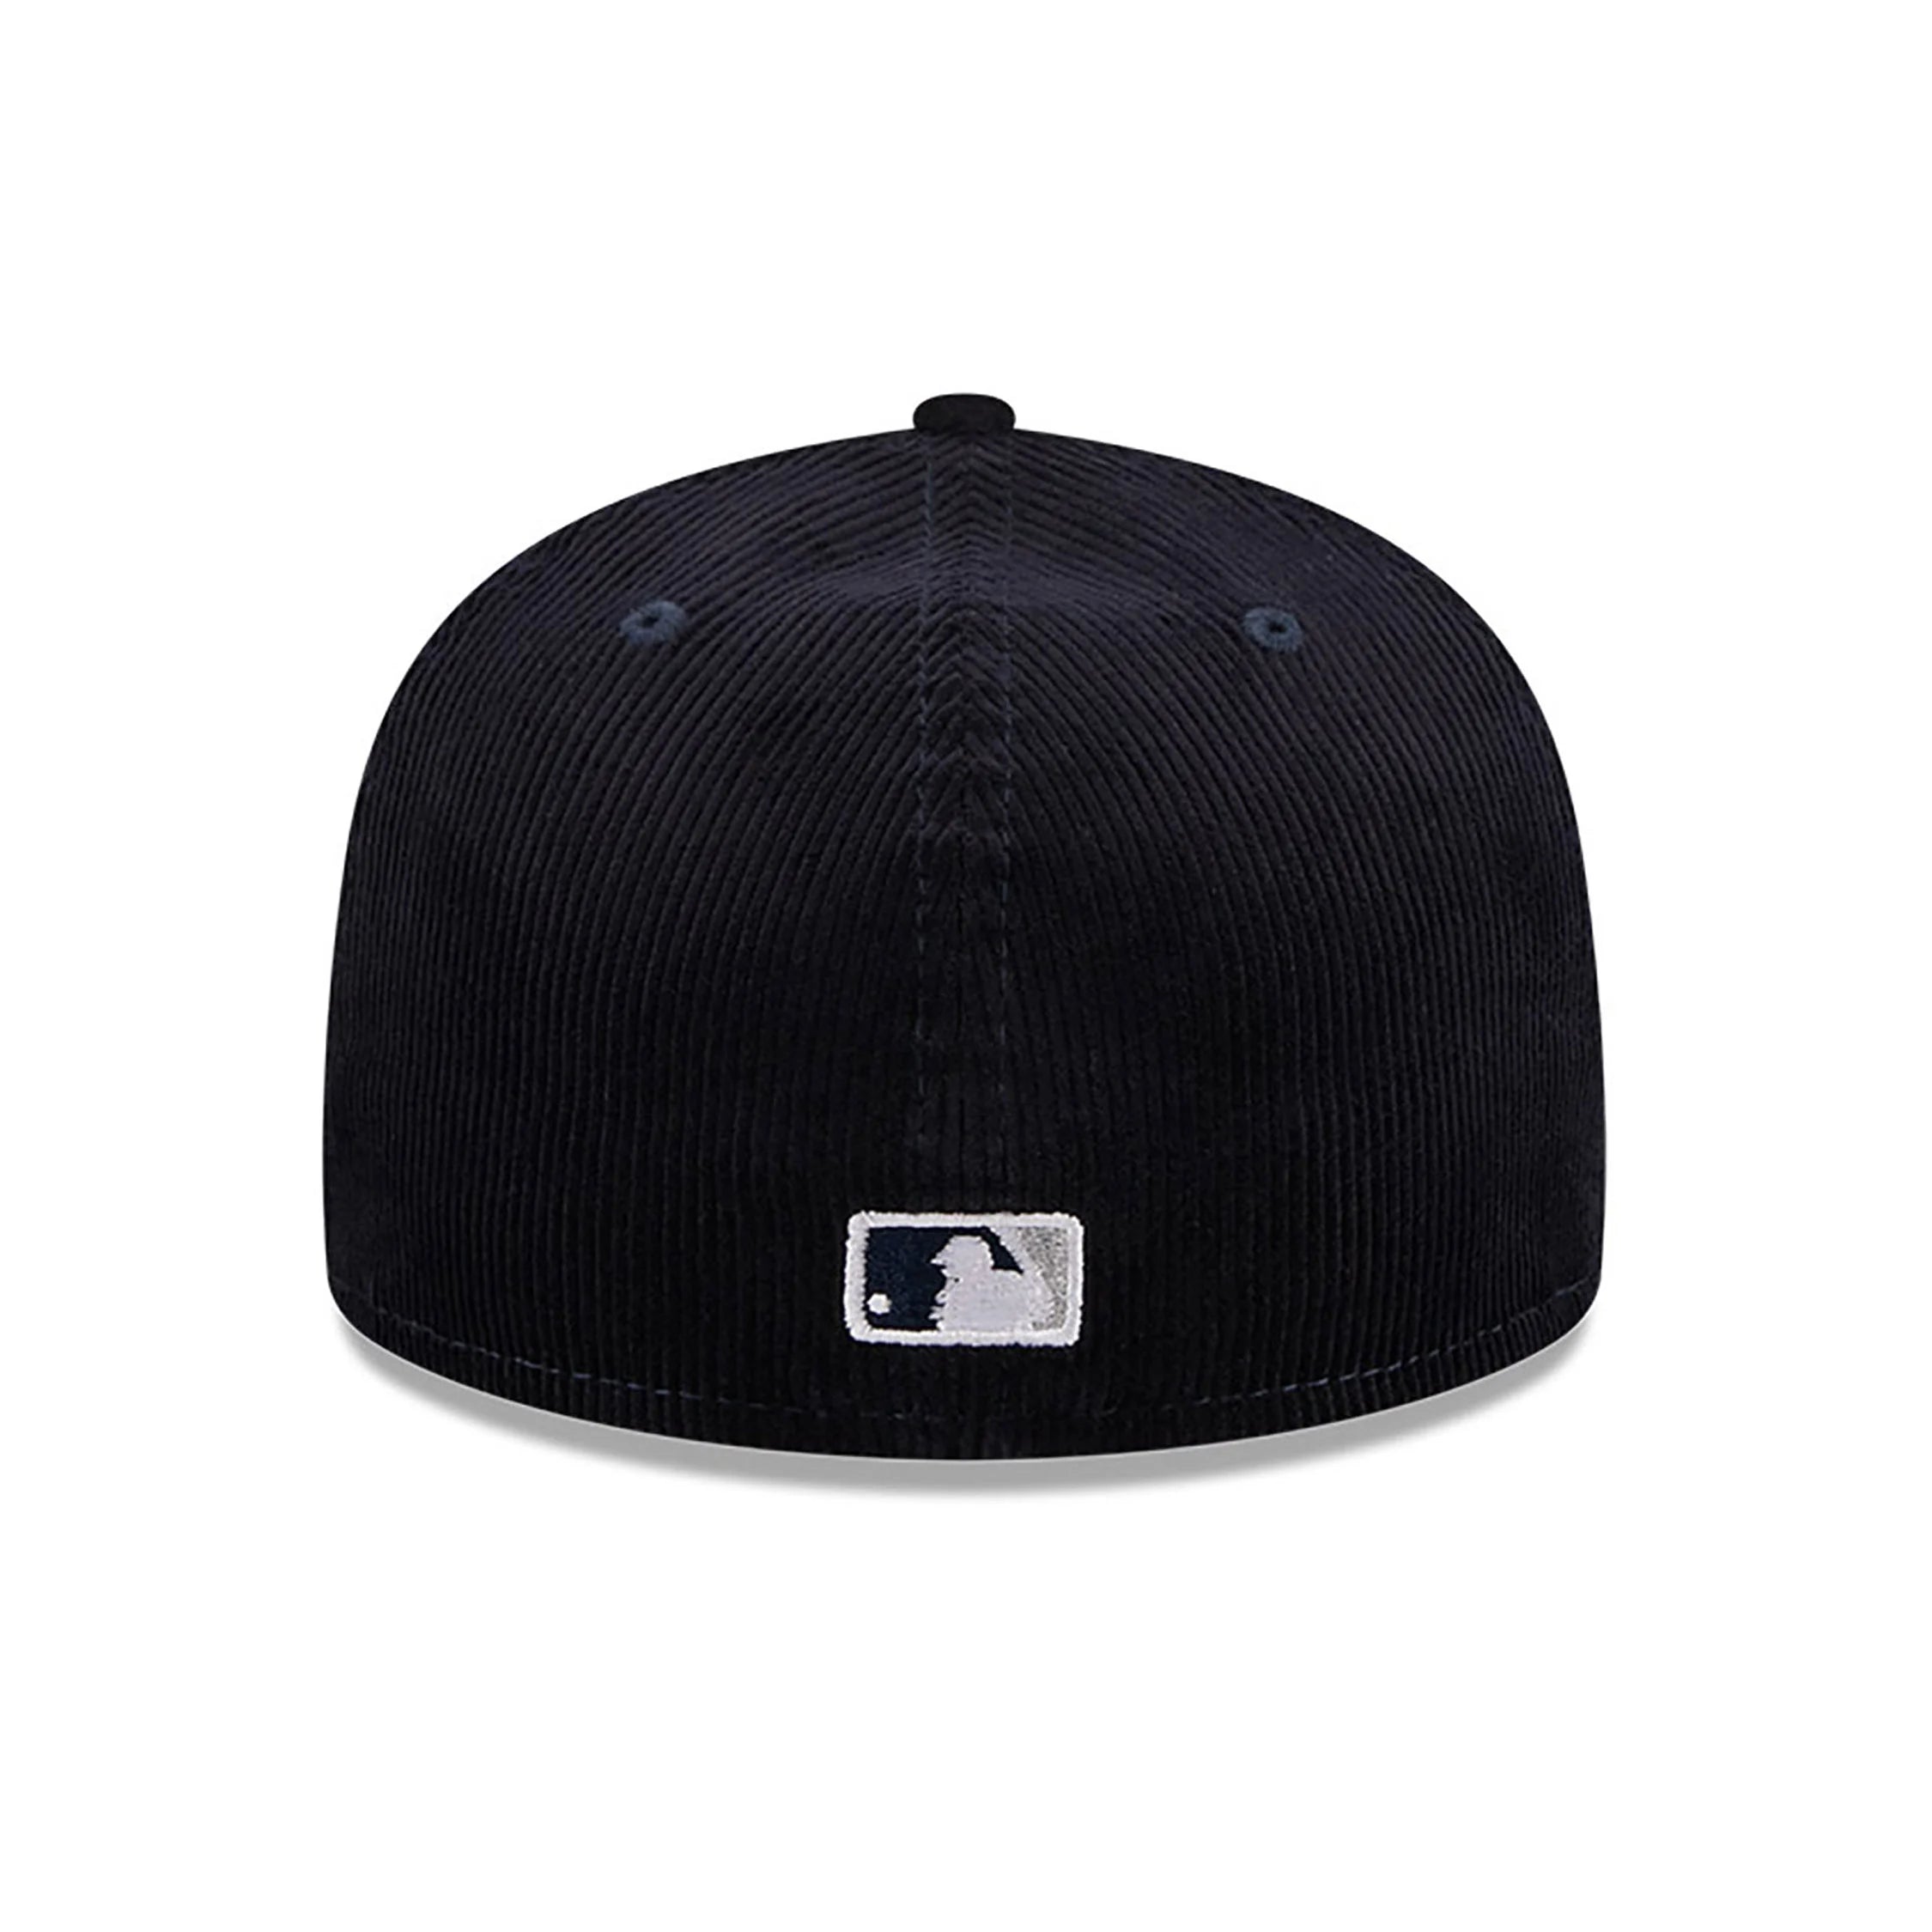 NEW ERA 59FIFTY MLB THROWBACK CORD NEW YORK YANKEES NAVY FITTED CAP